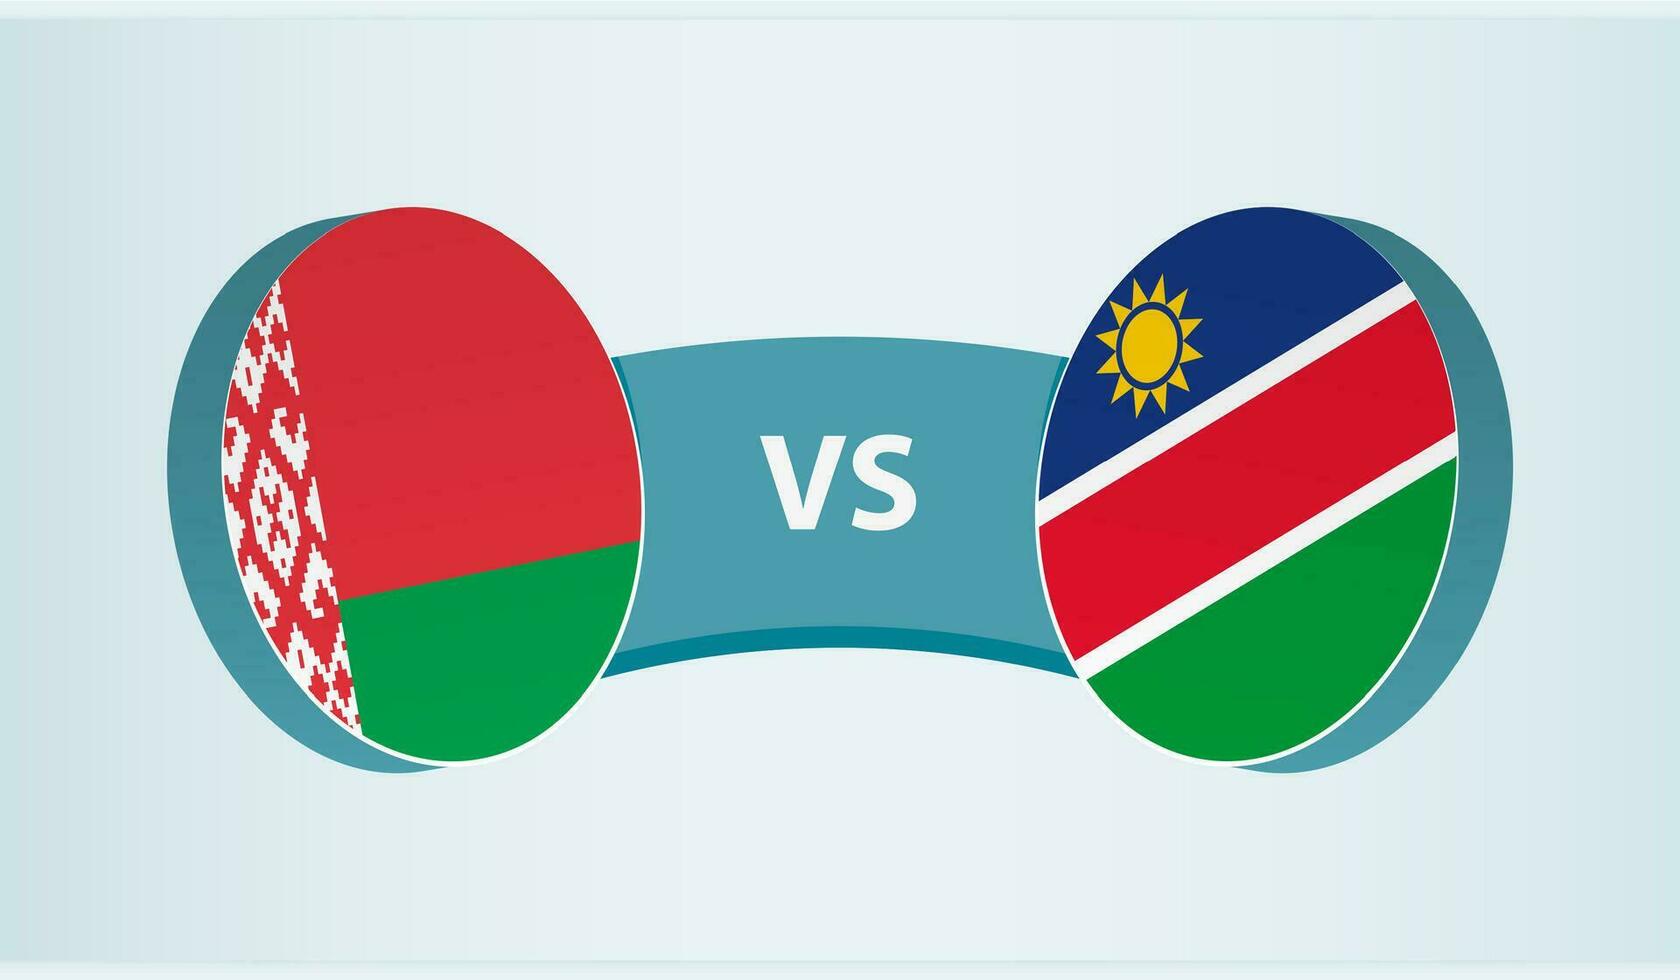 Belarus versus Namibia, team sports competition concept. vector